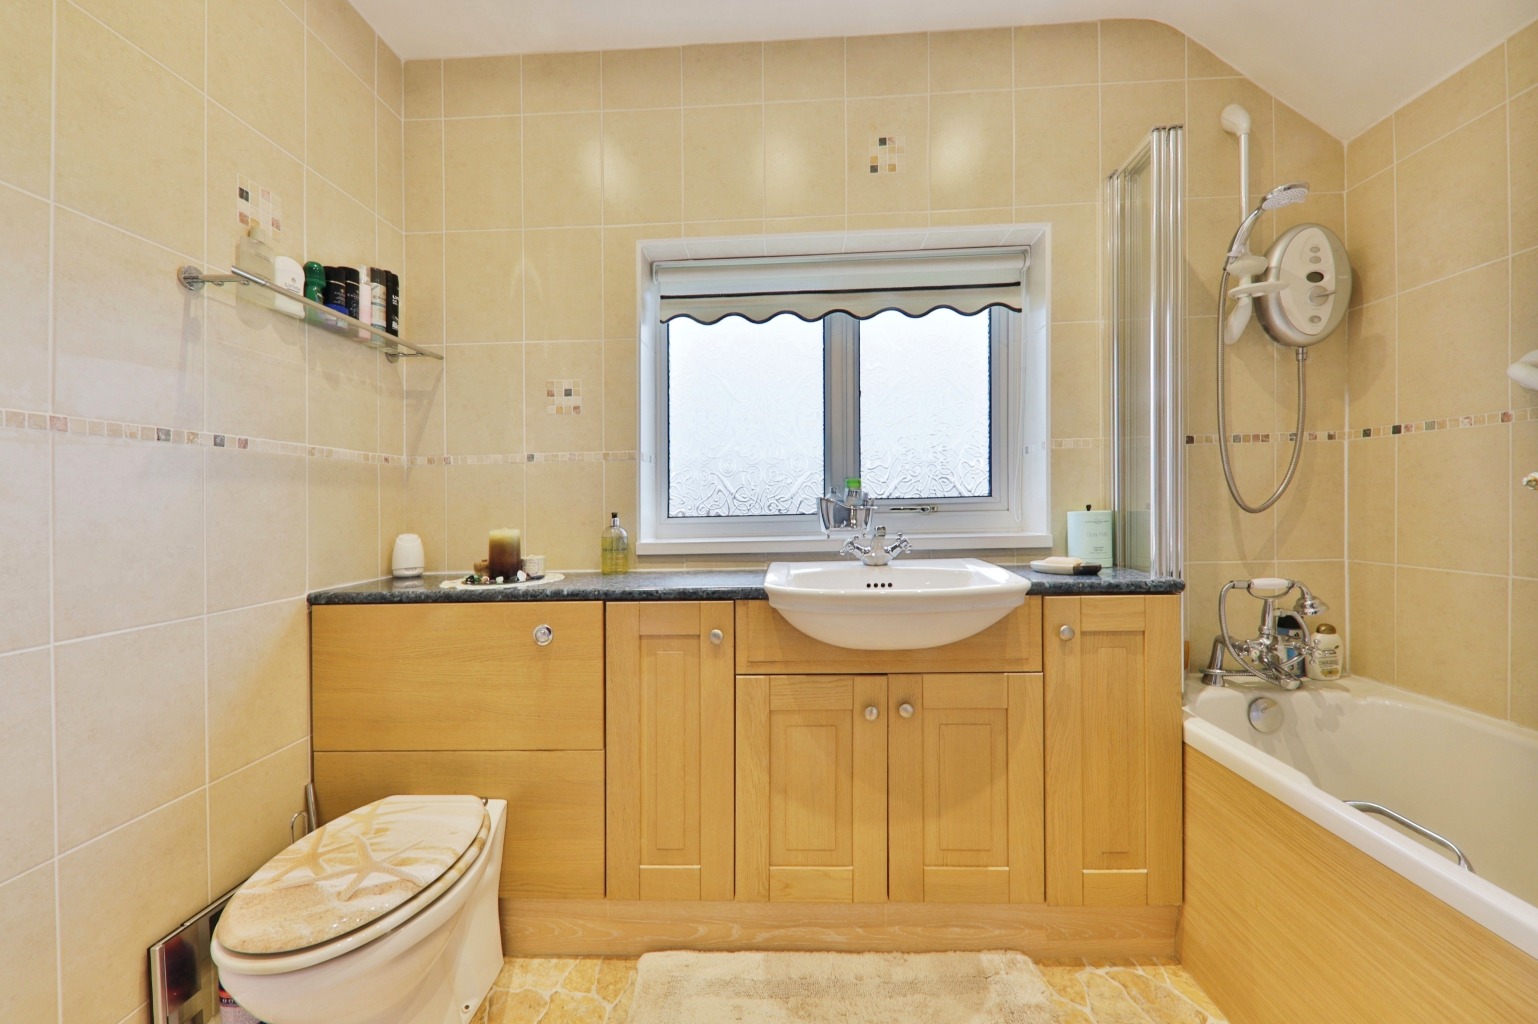 3 bed detached house for sale in West Acridge, Barton upon Humber  - Property Image 11